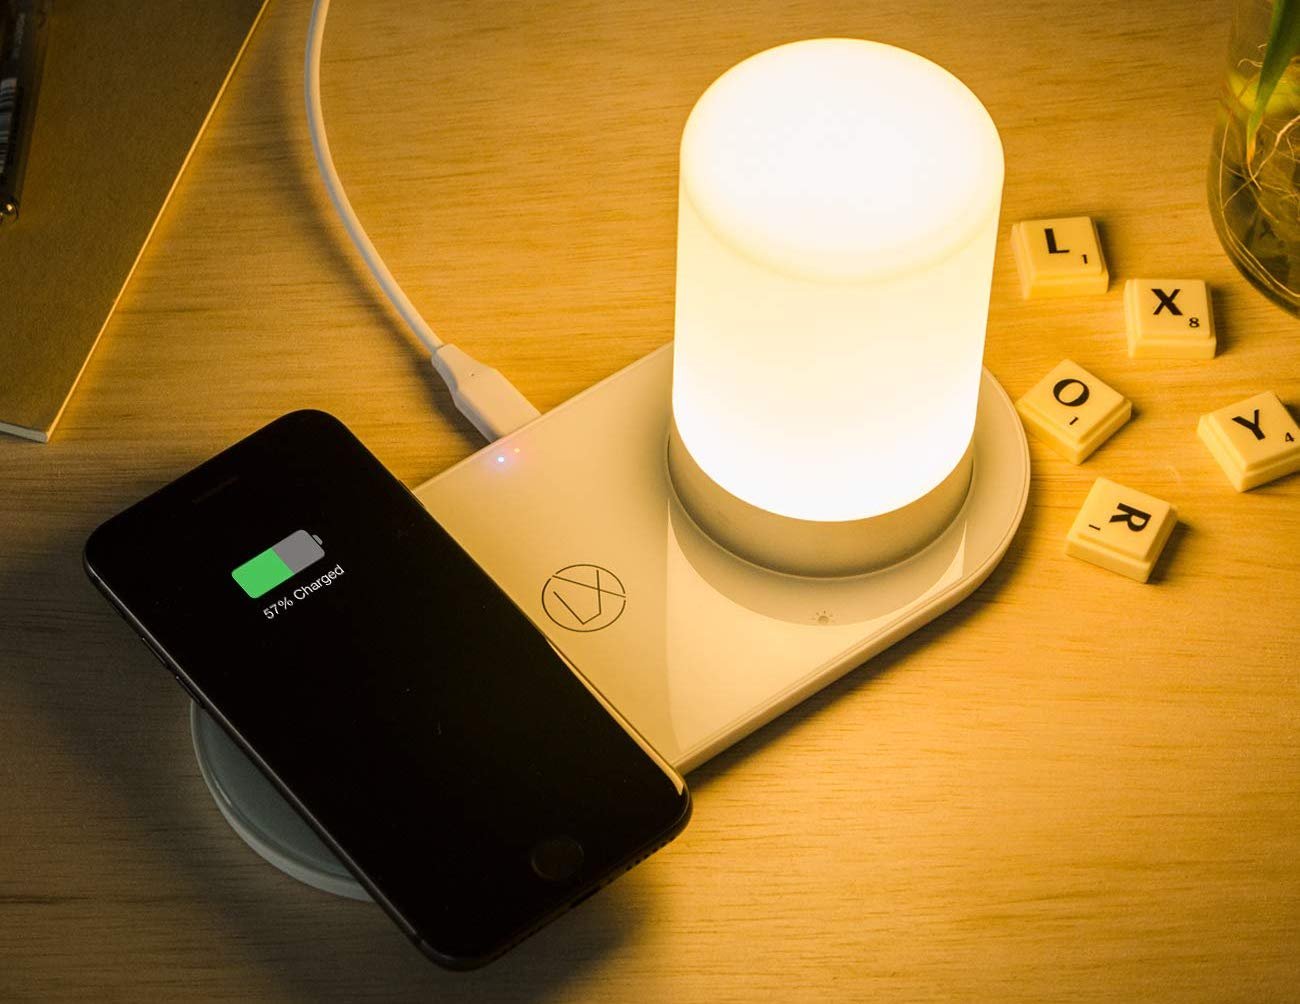 LXORY Wireless Charging Lamp provides power and light